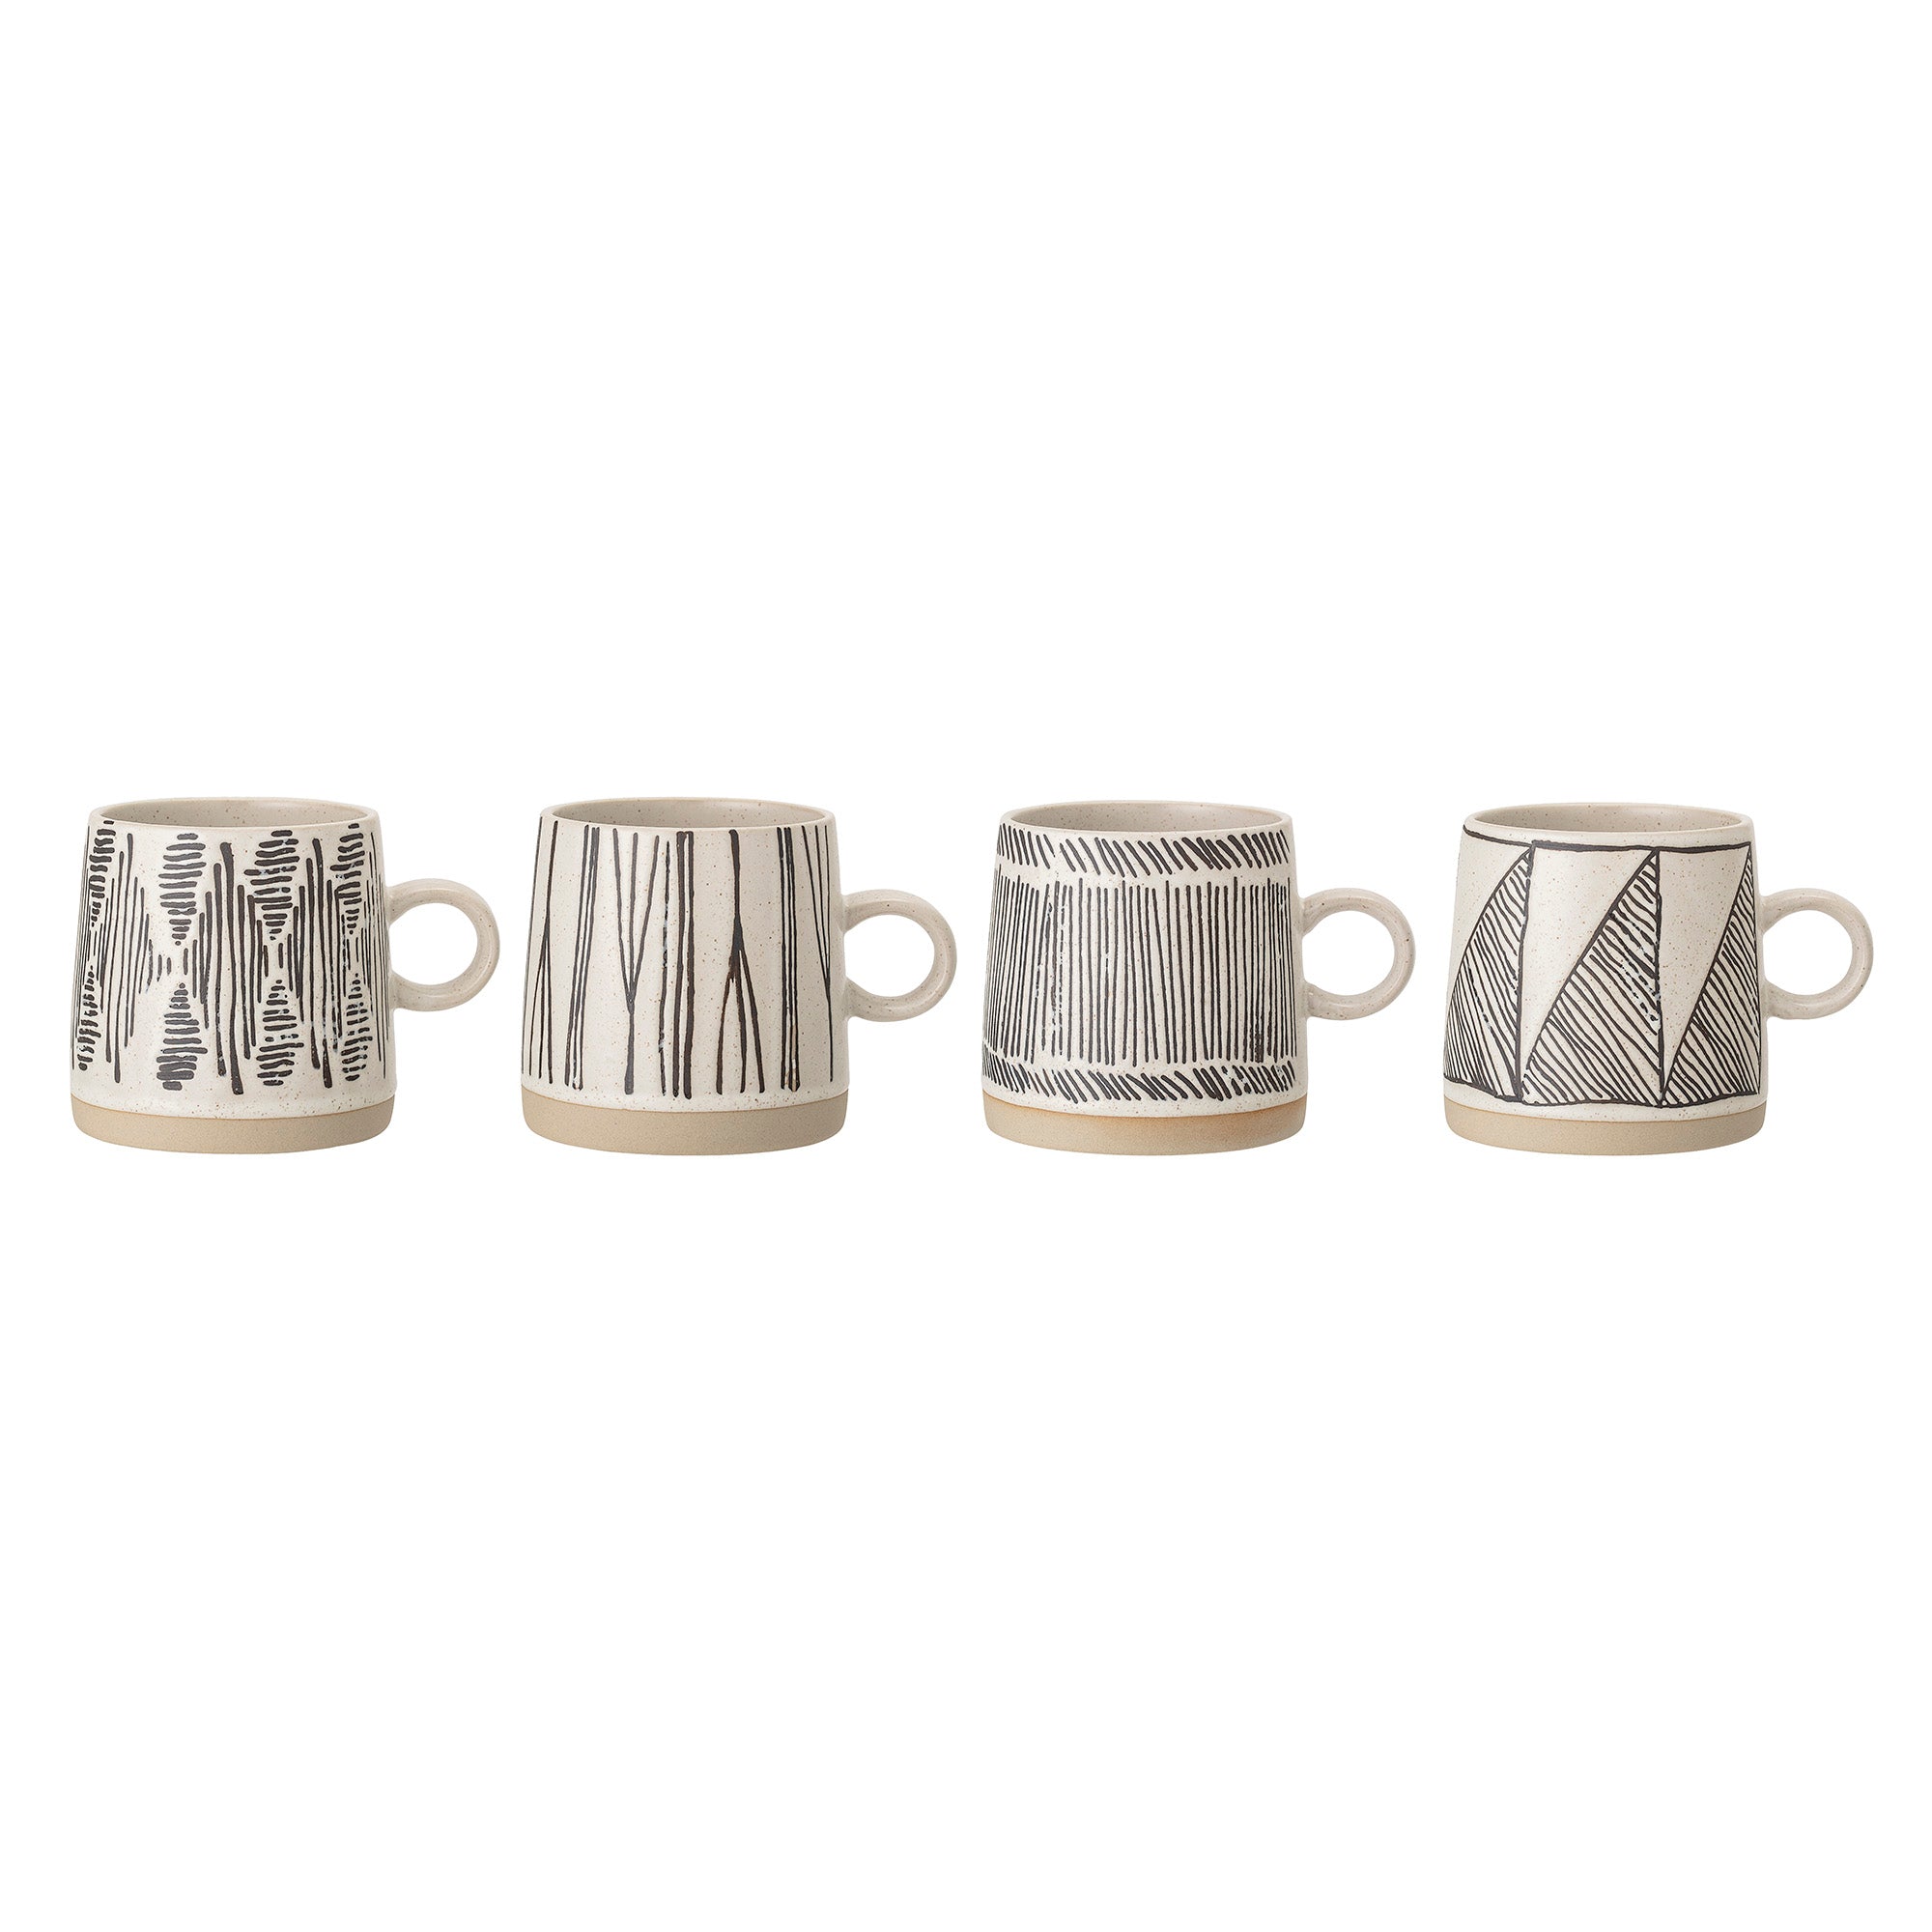 Black & White Patterned Mug - 4 styles to choose from